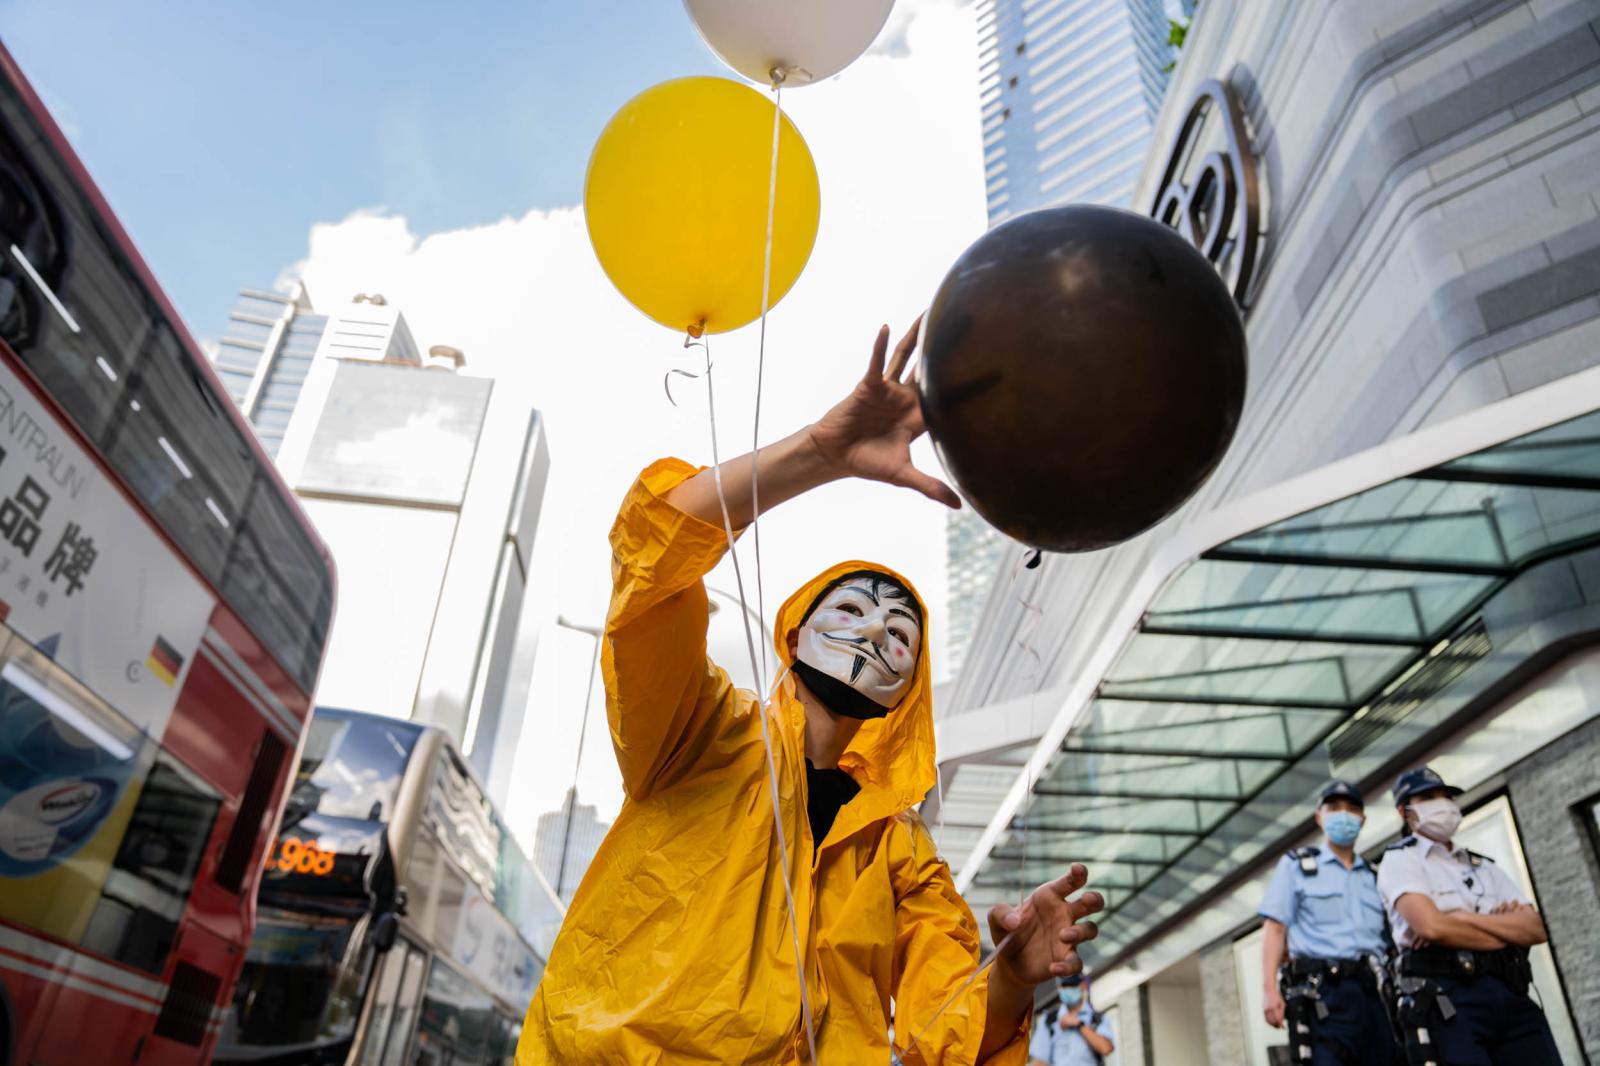 A protestor dressed in a yellow raincoat with black, yellow, and white balloons. Two years ago, a man named Marco Leung Ling-kit fell to his death from scaffolding of a nearby building during social unrest in Hong Kong. Dozens of people laid white flowers, candles, and ribbons in mourning.